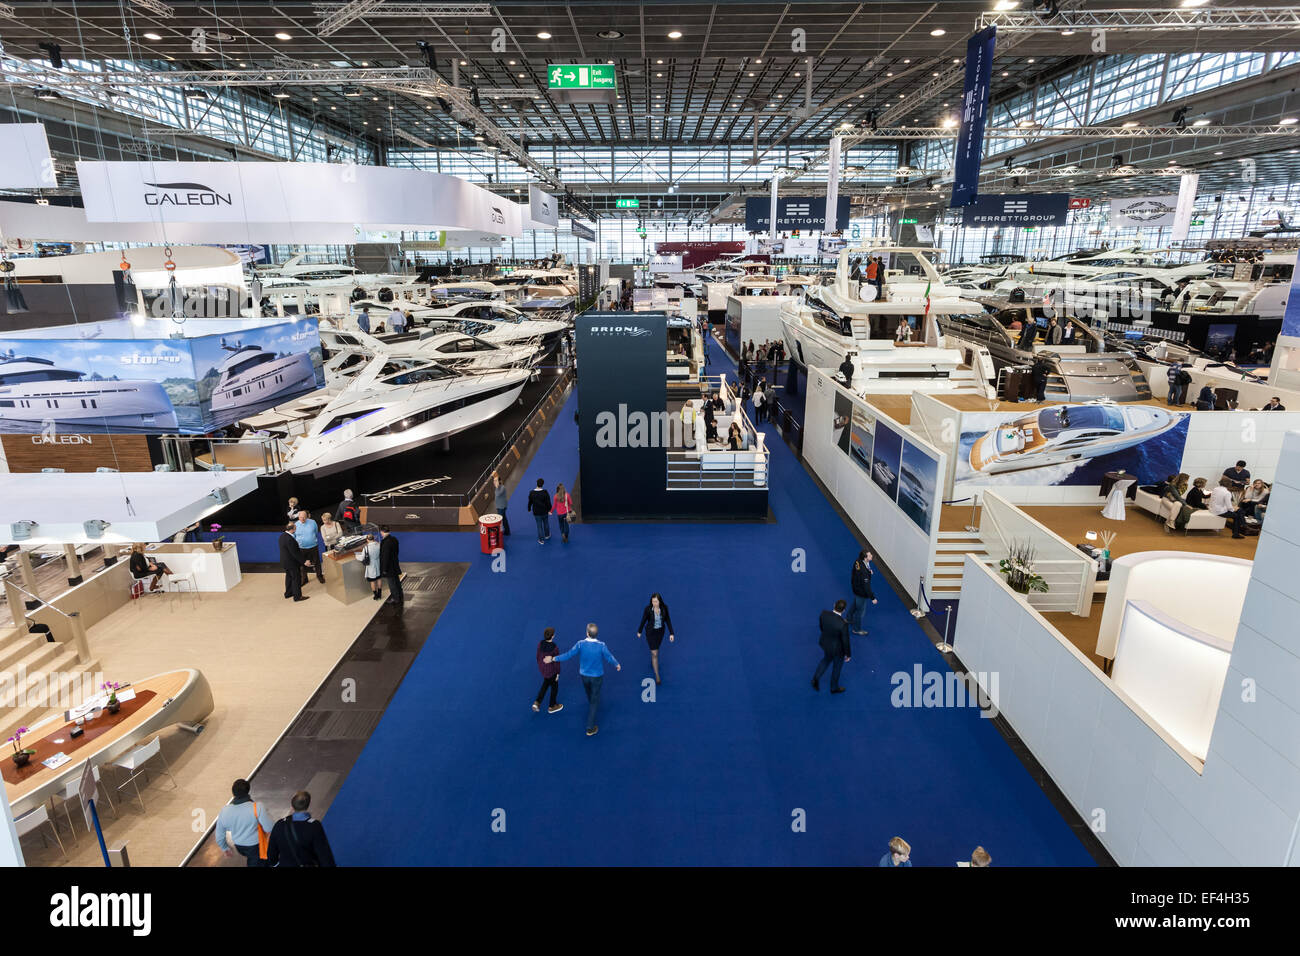 boot Duesseldorf 2015 - the worlds biggest yachting and water sports exhibition. January 25, 2015 in Duesseldorf, Germany Stock Photo